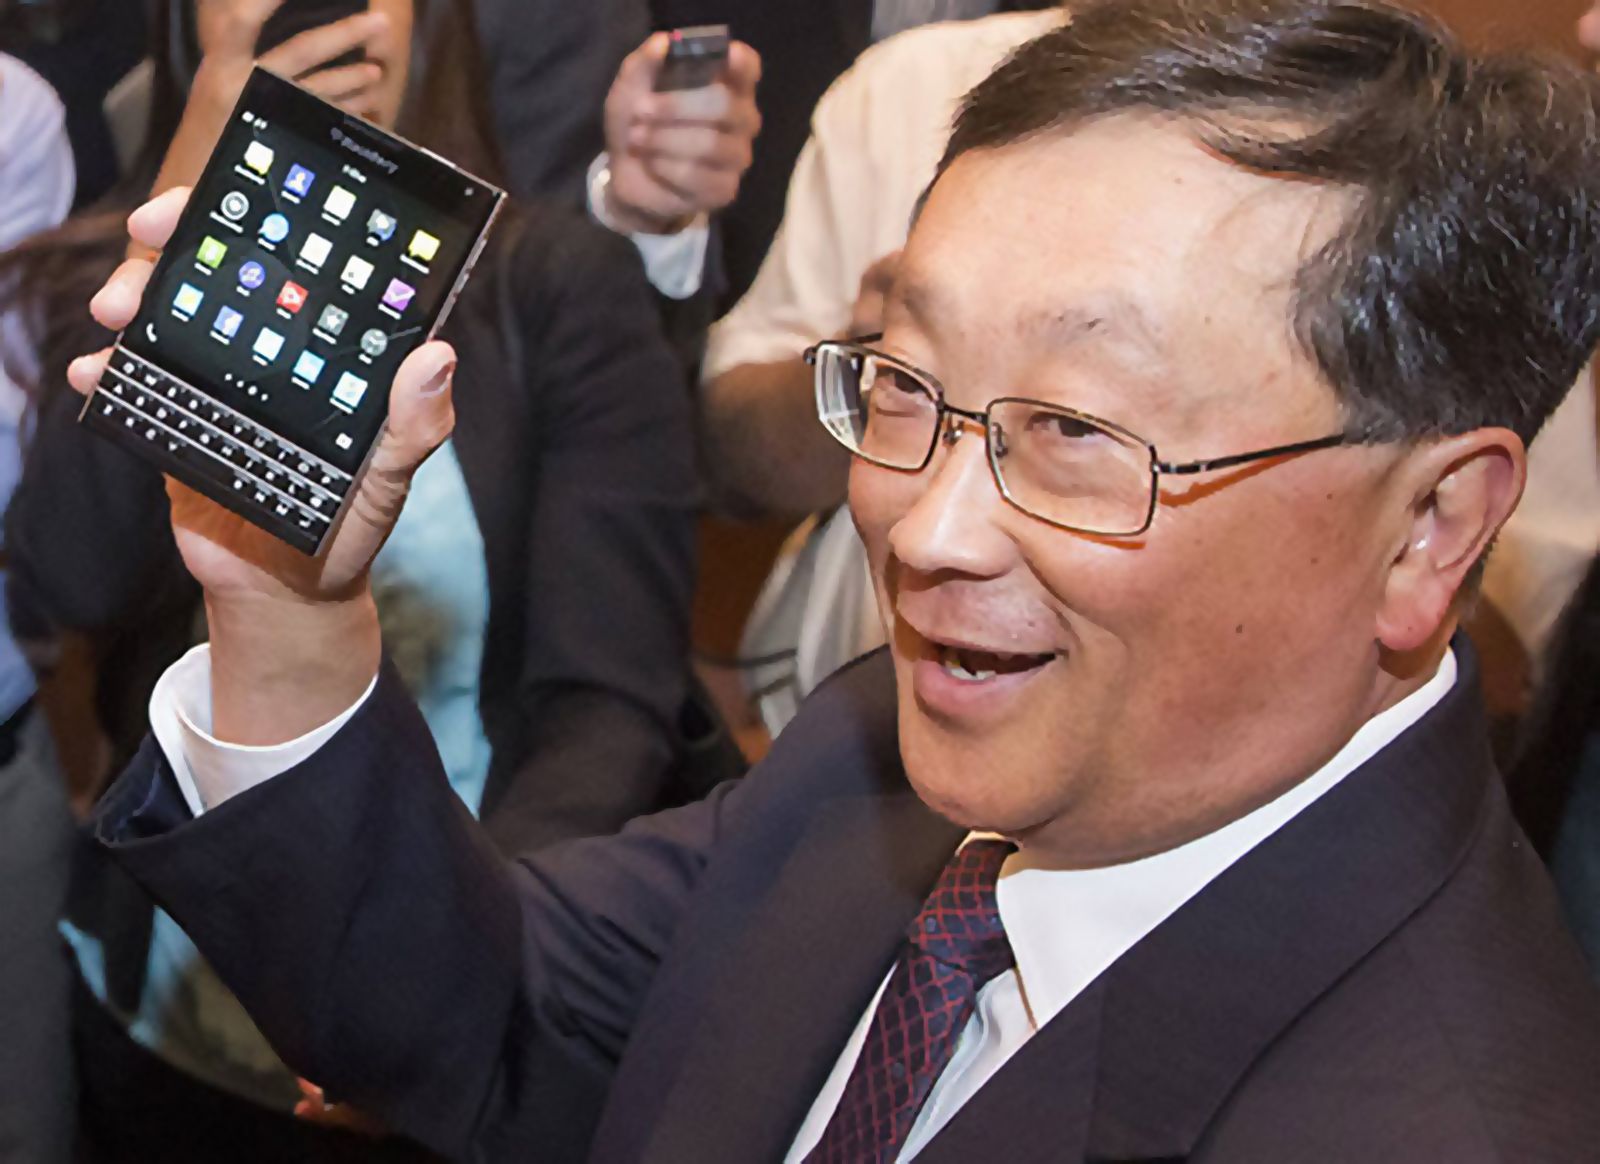 blackberry says no new handsets for foreseeable future but here are the ones it will focus on image 1